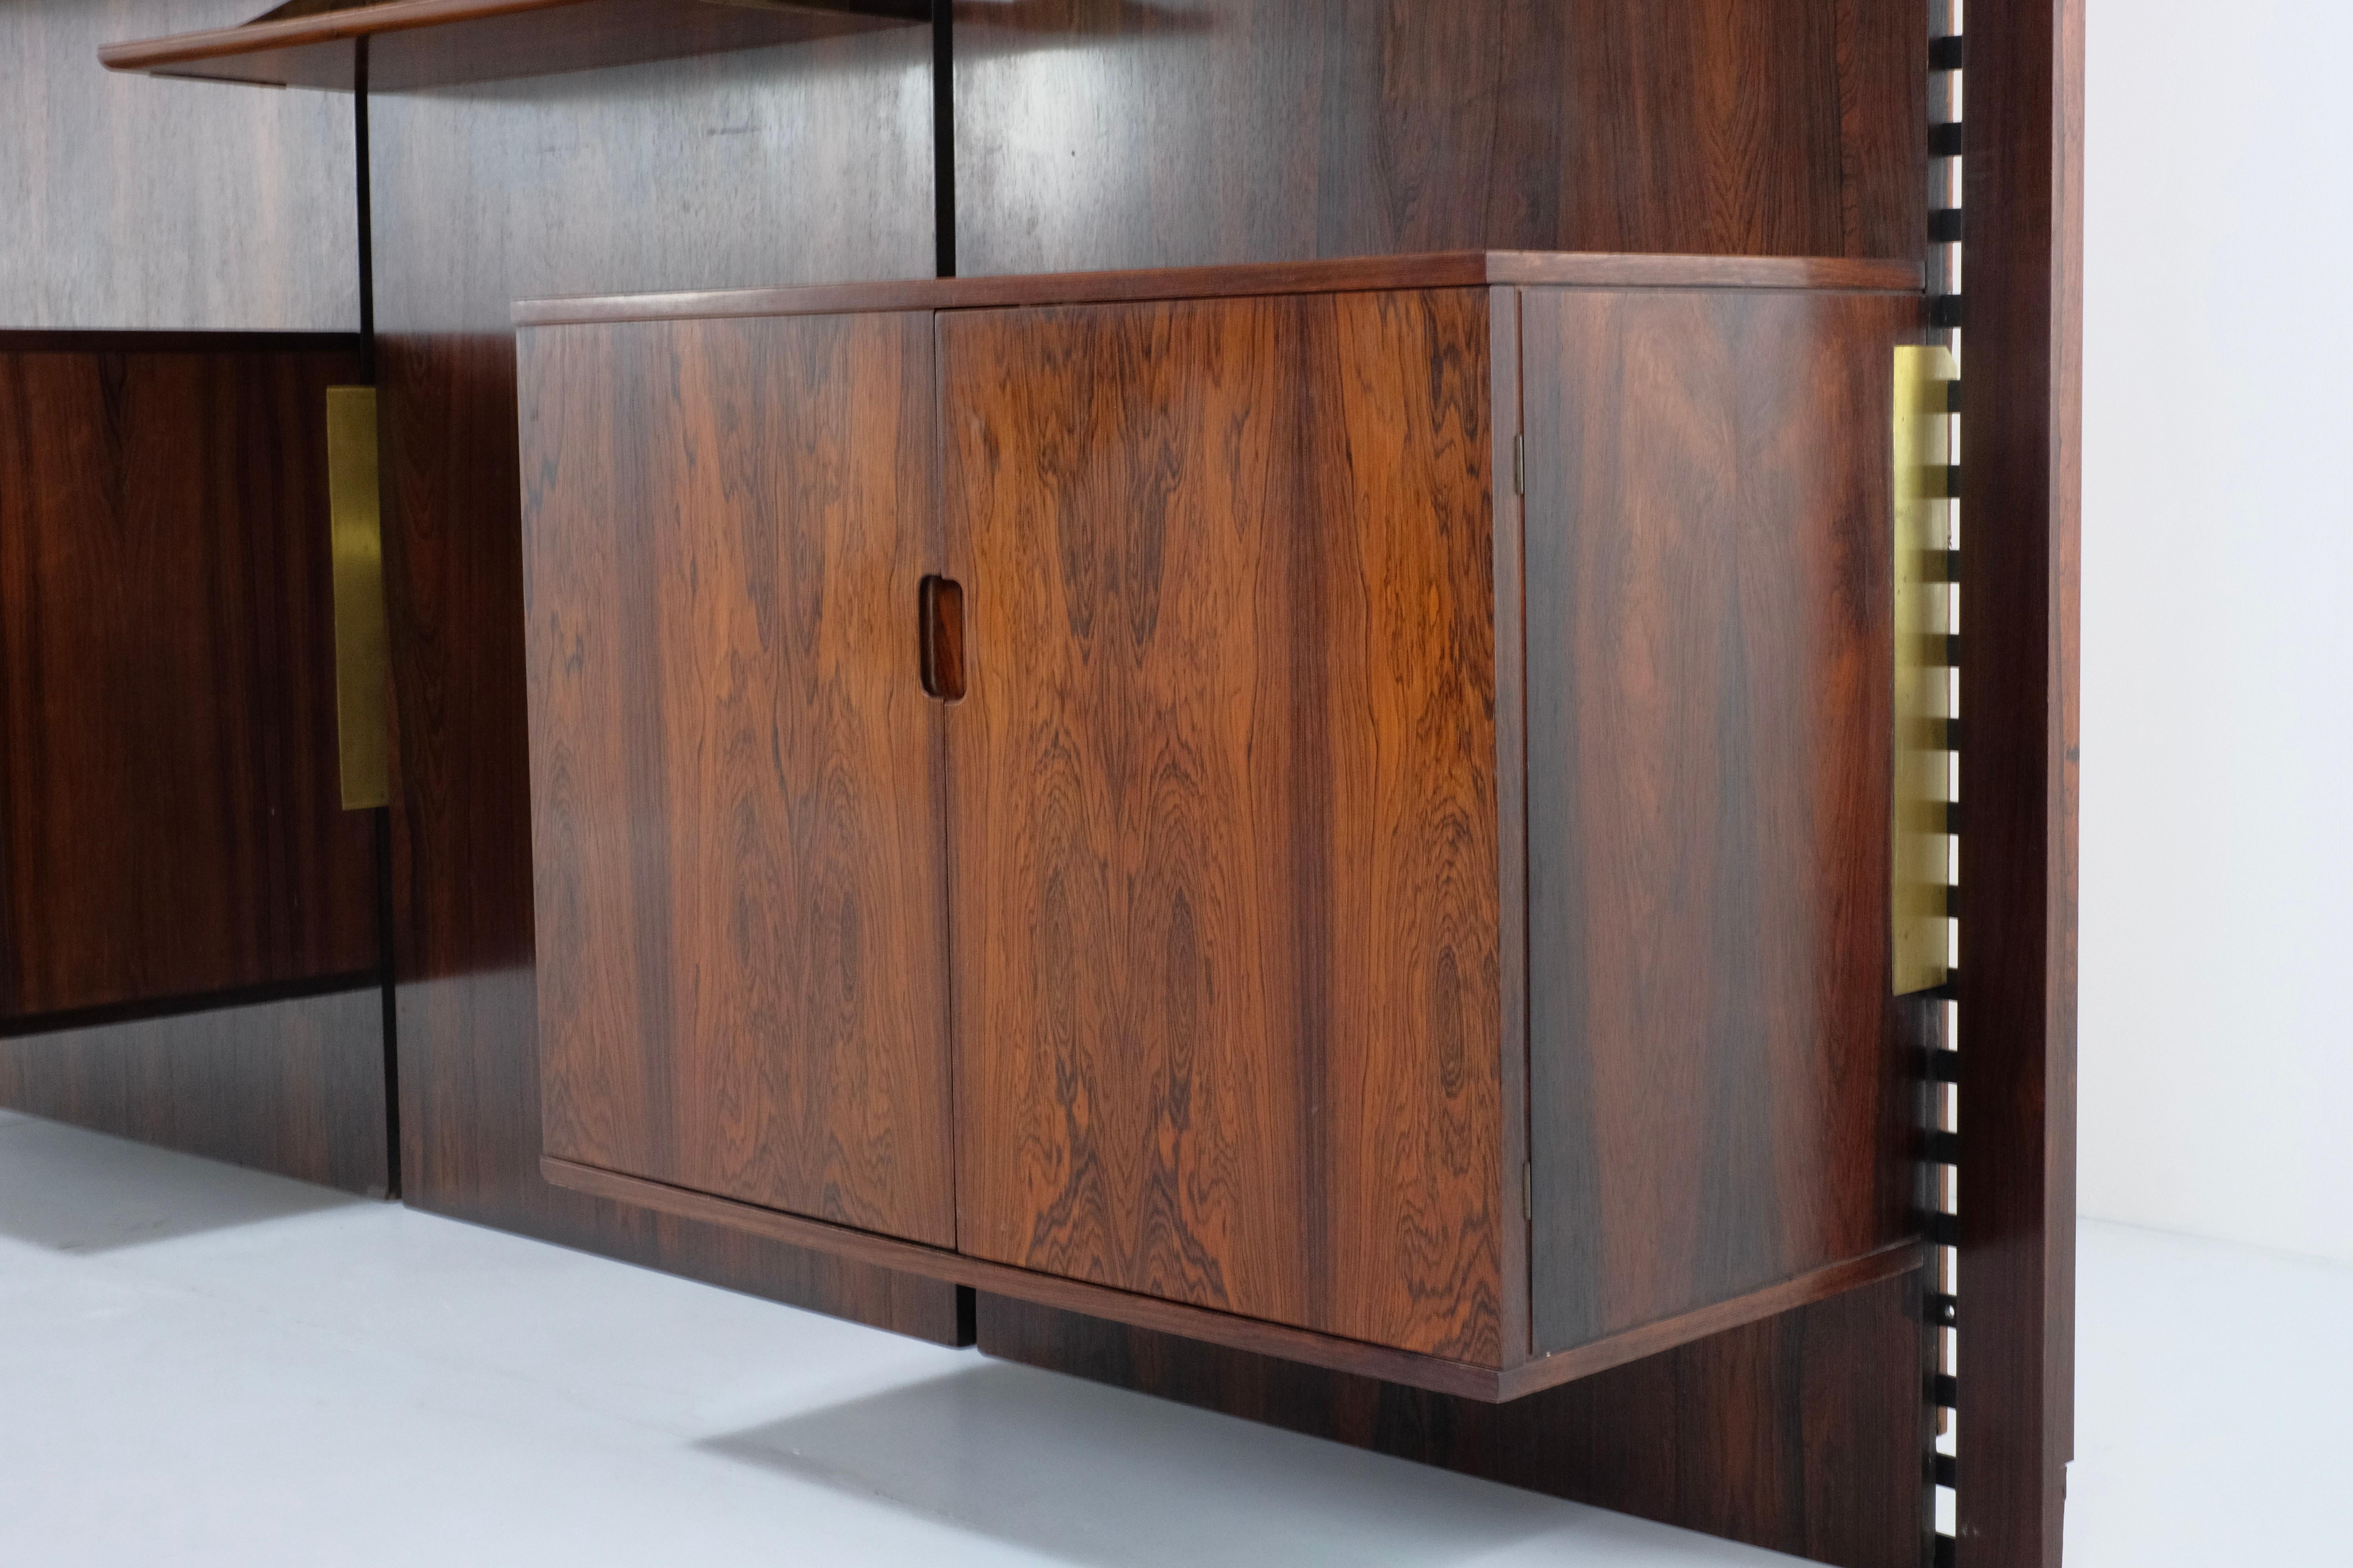 20th Century Midcentury Wall Unit in Wood and Brass by Comolli MarCo for Mobilia, Italy, 1960